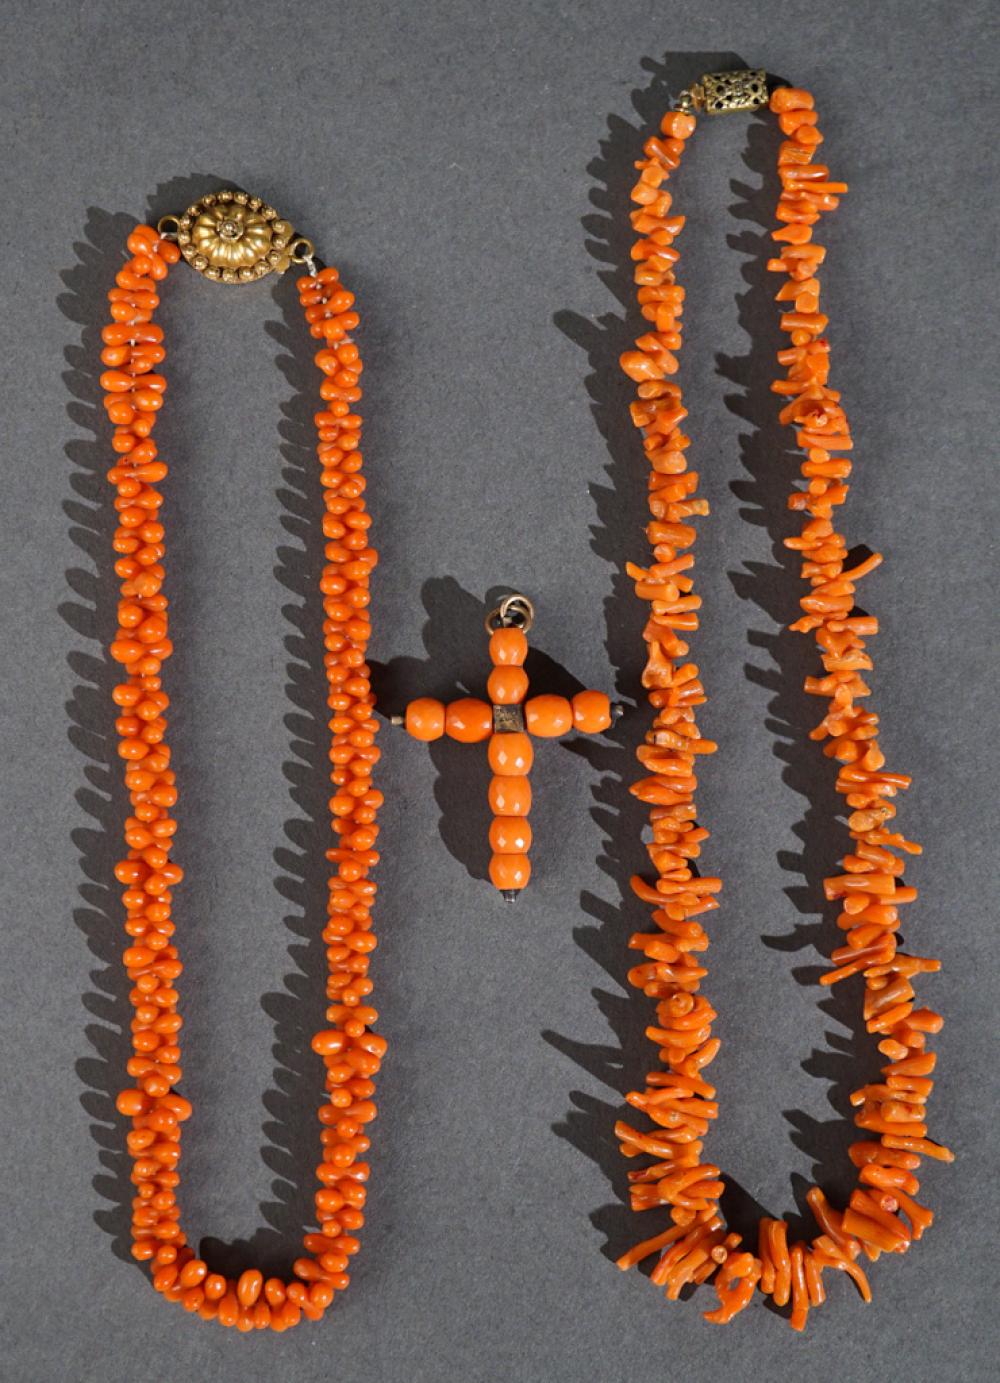 TWO CORAL NECKLACES AND A CROSS PENDANTTwo